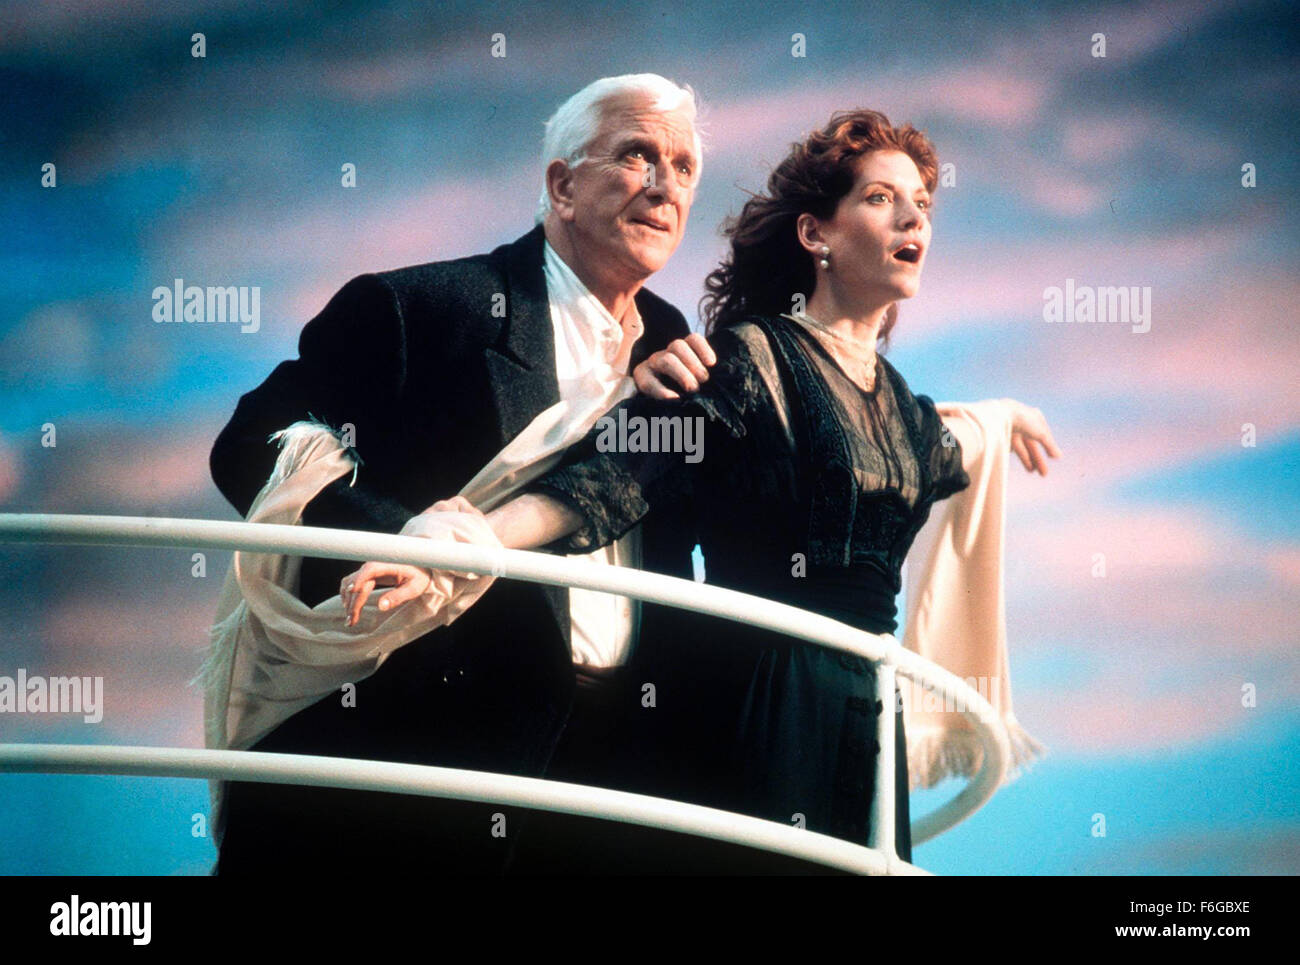 Jul 23, 1998; Los Angeles, CA, USA; Actor LESLIE NIELSEN stars as Ryan Harrison and MELINDA MCGRAW as Cass Lake in the Morgan Creek Productions comedy, 'Wrongfully Accused.' Directed by Pat Proft. Stock Photo